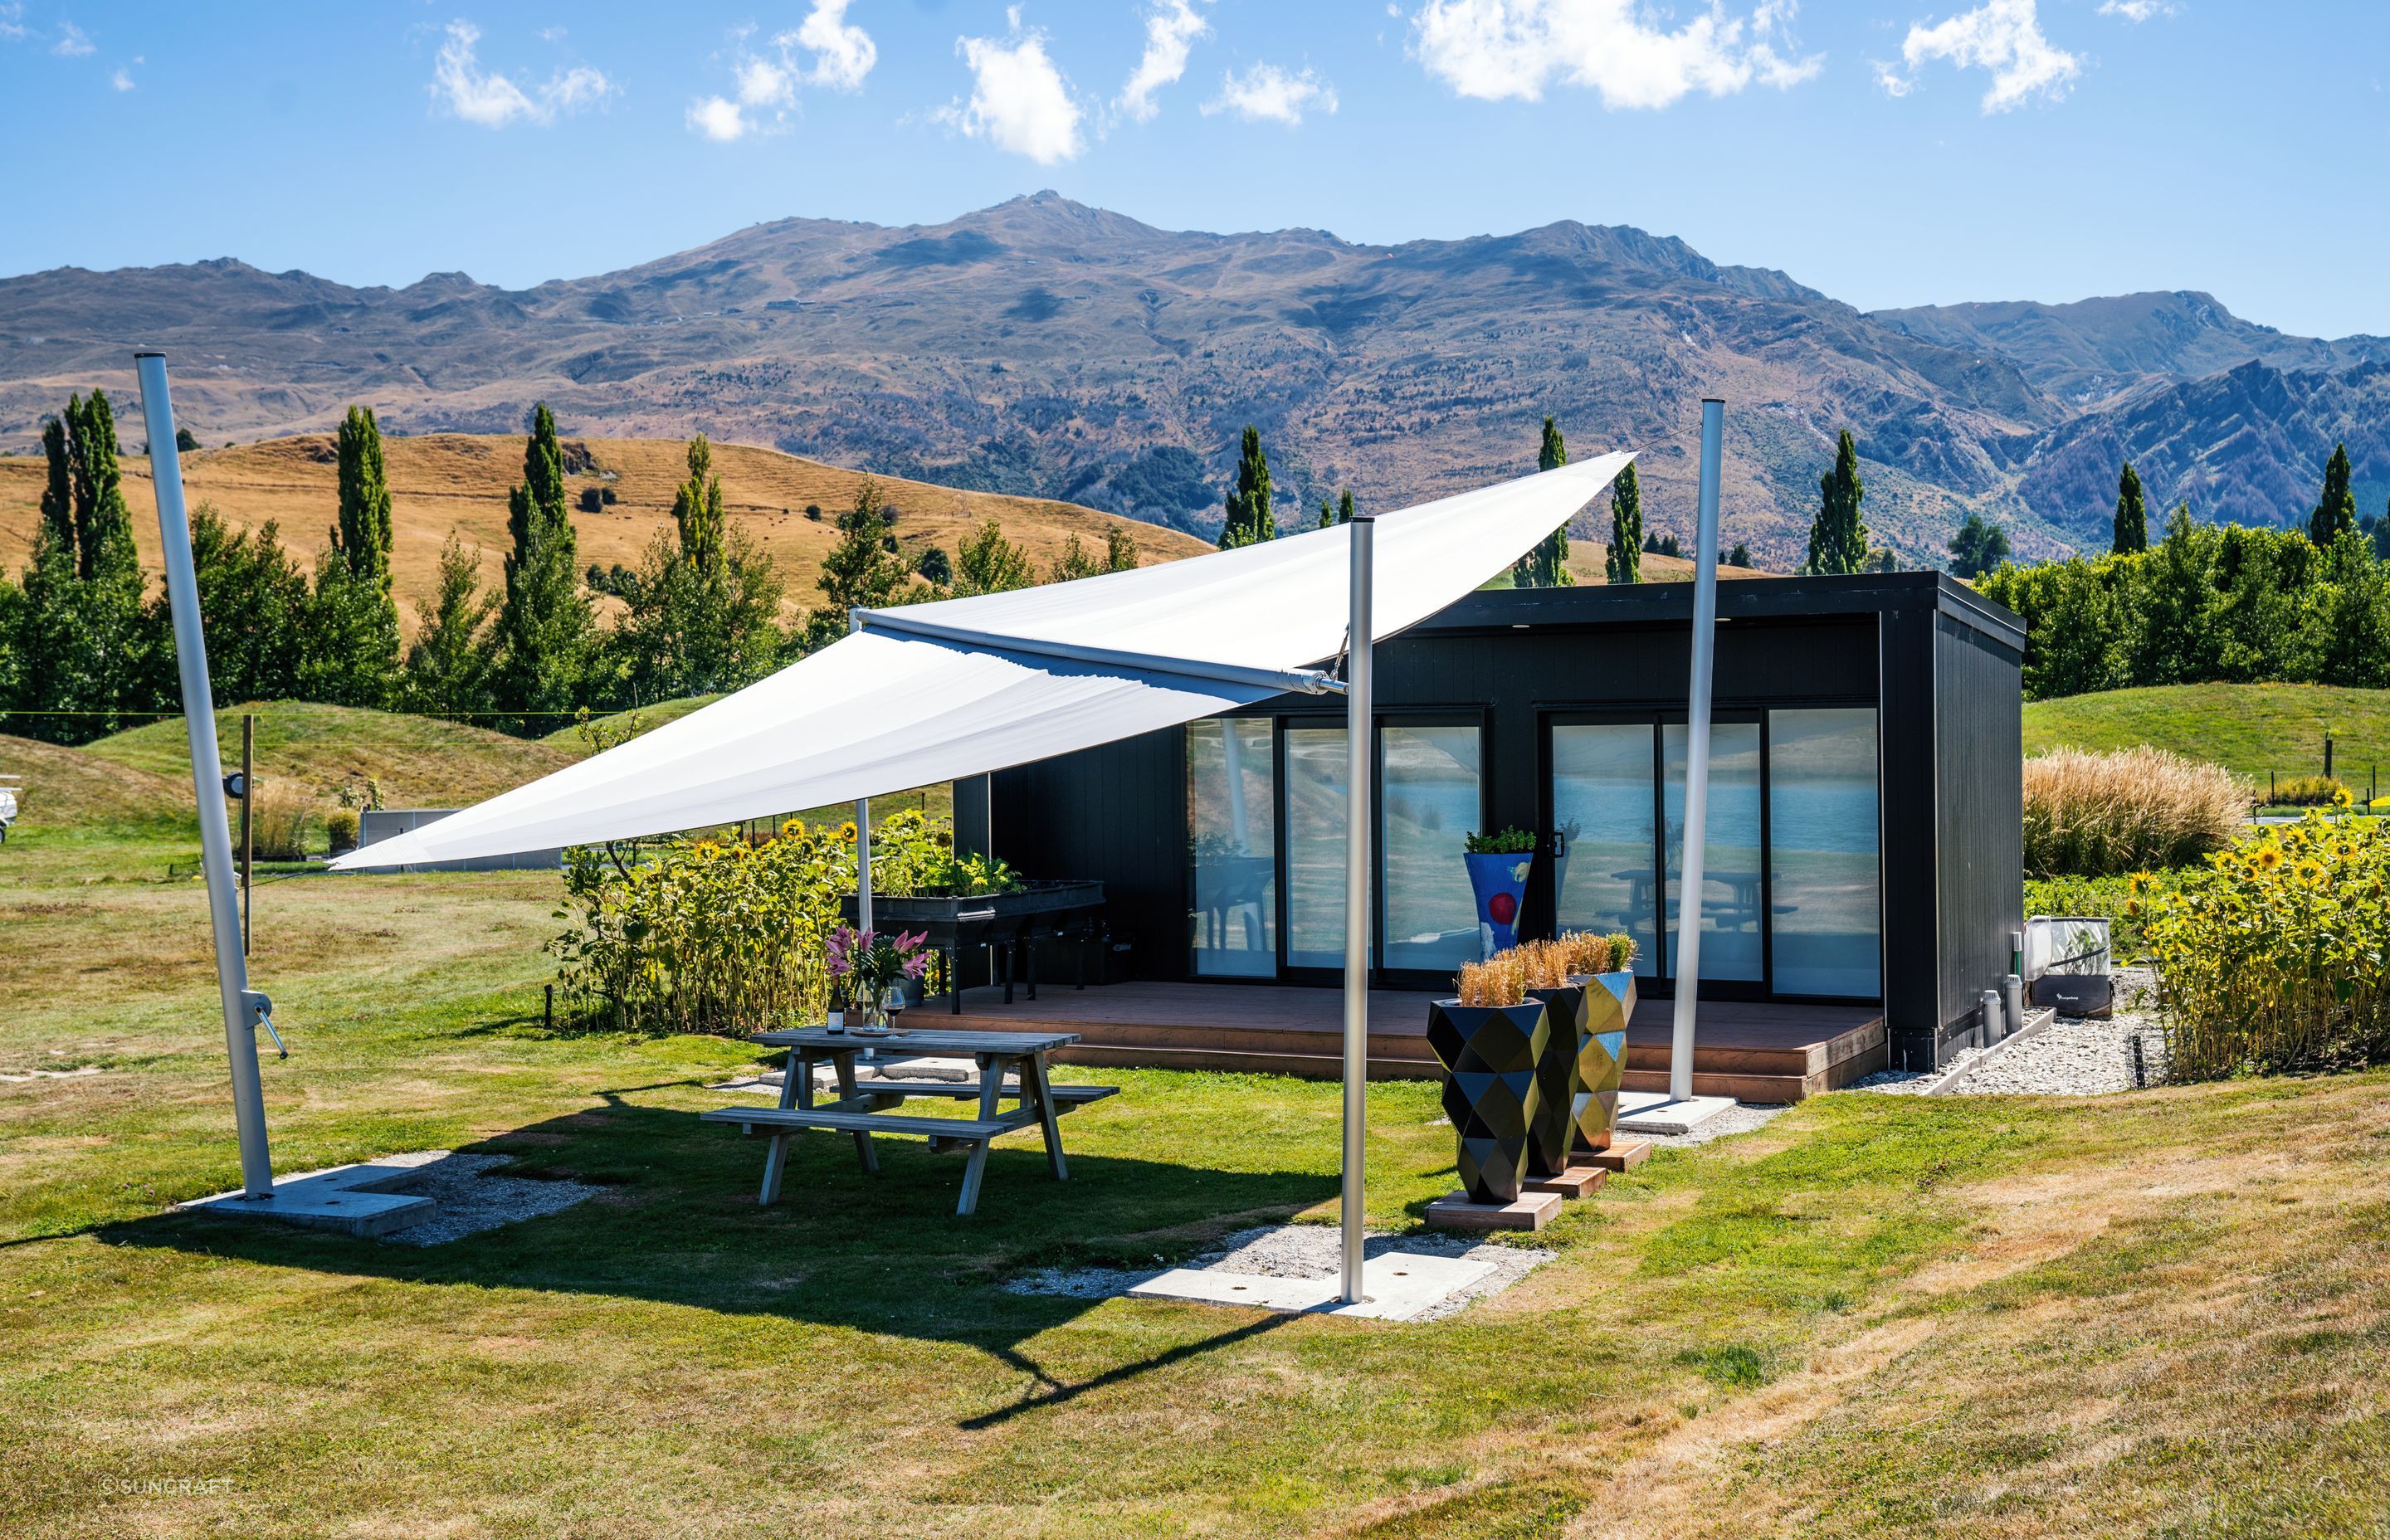 This tiny home in Dalefield, Queenstown paints an idyllic scene and shows the potential of what can be realised with tiny home design.